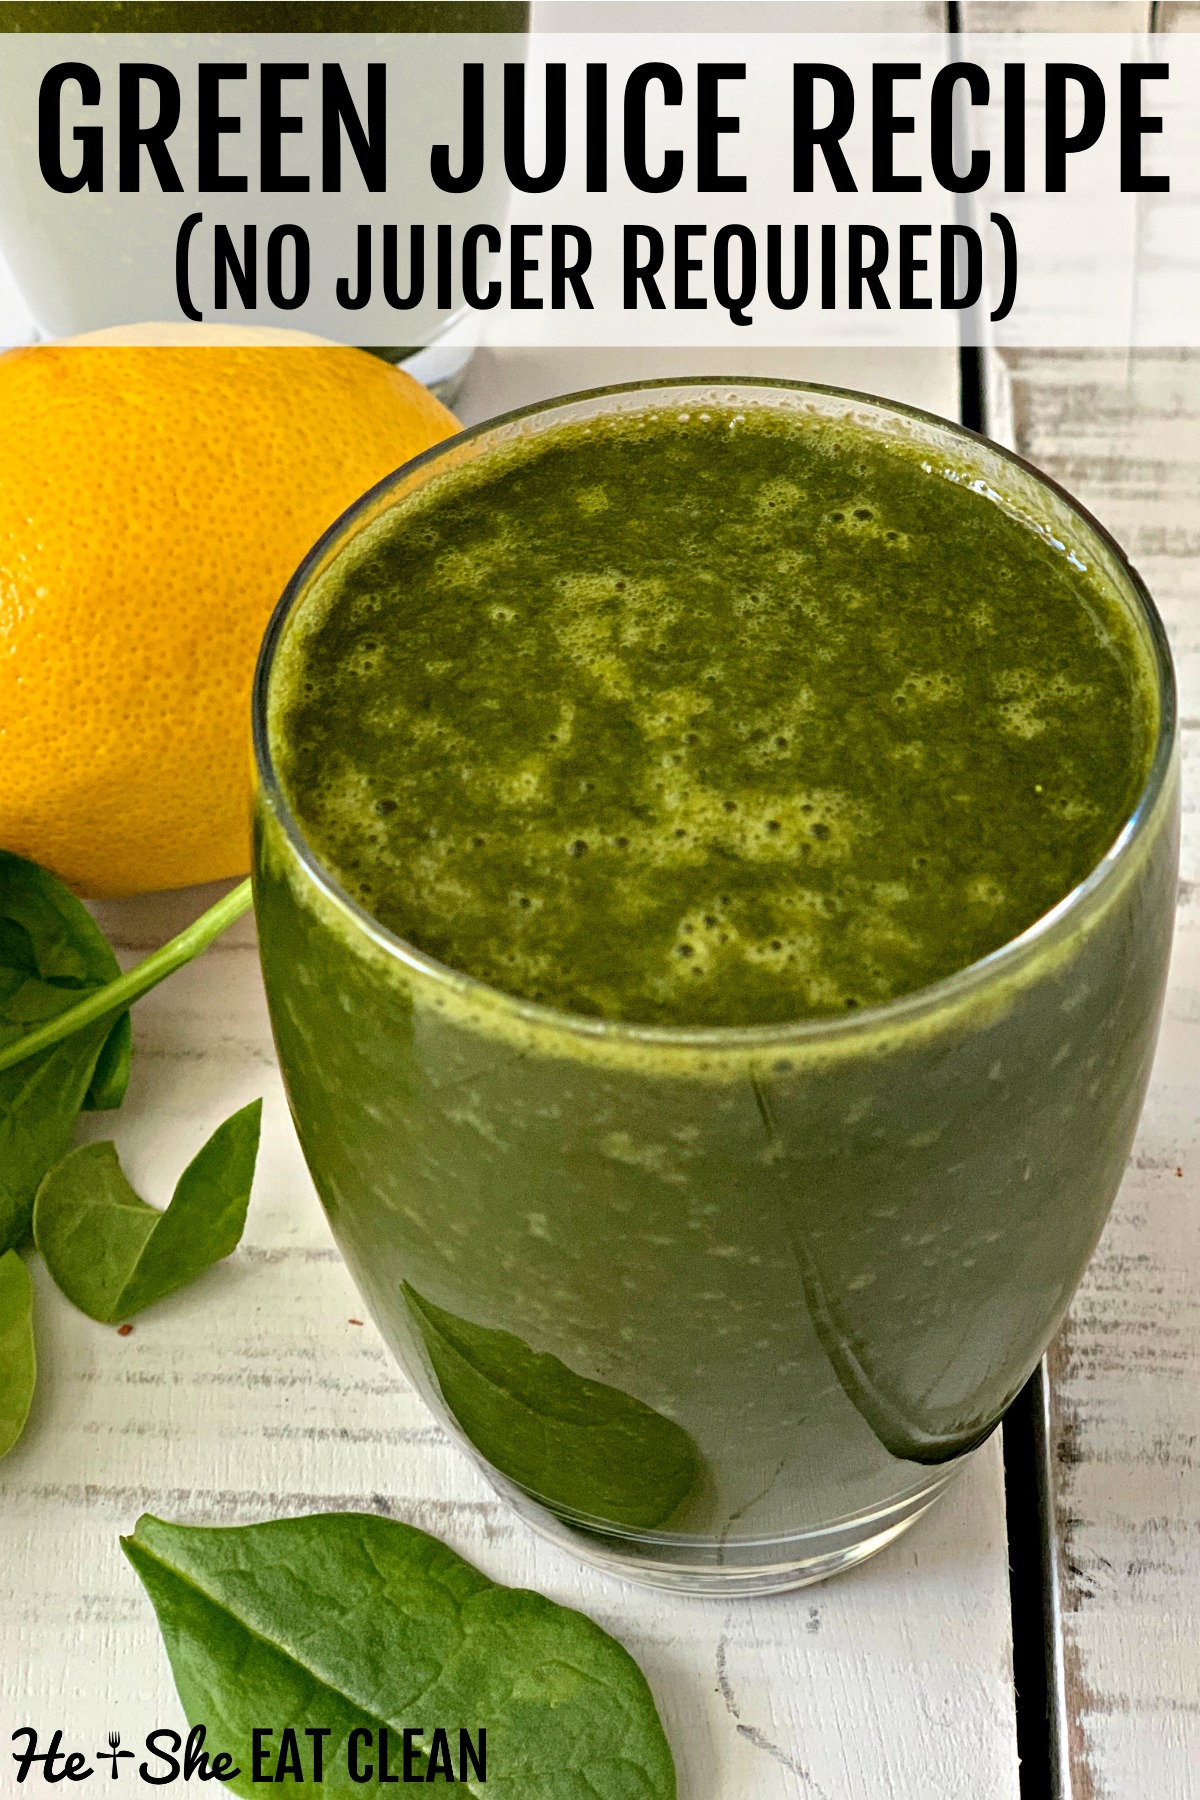 https://www.heandsheeatclean.com/wp-content/uploads/2013/02/green-juice-no-juicer-he-and-she-eat-clean.jpg